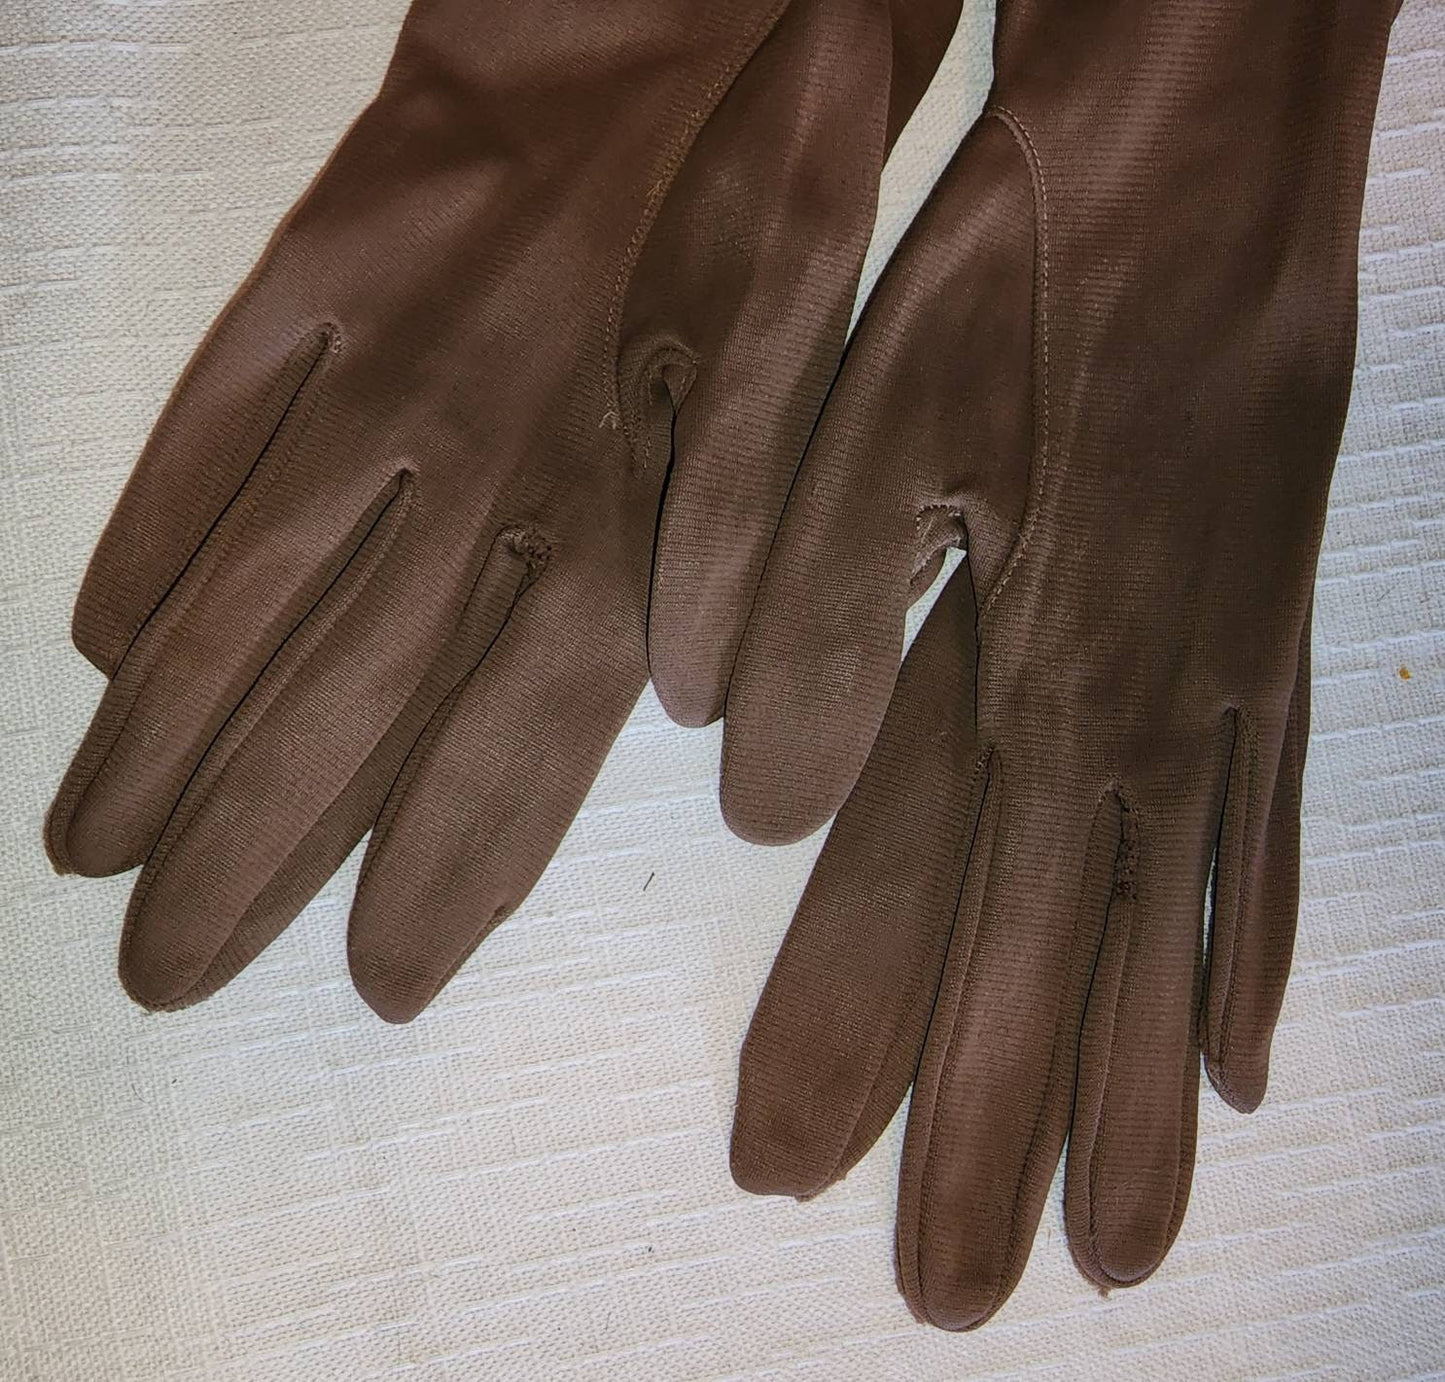 Vintage Brown Gloves 1950s 60s Midlength Ruched Nylon Fabric Gloves Mid Century Rockabilly Boho